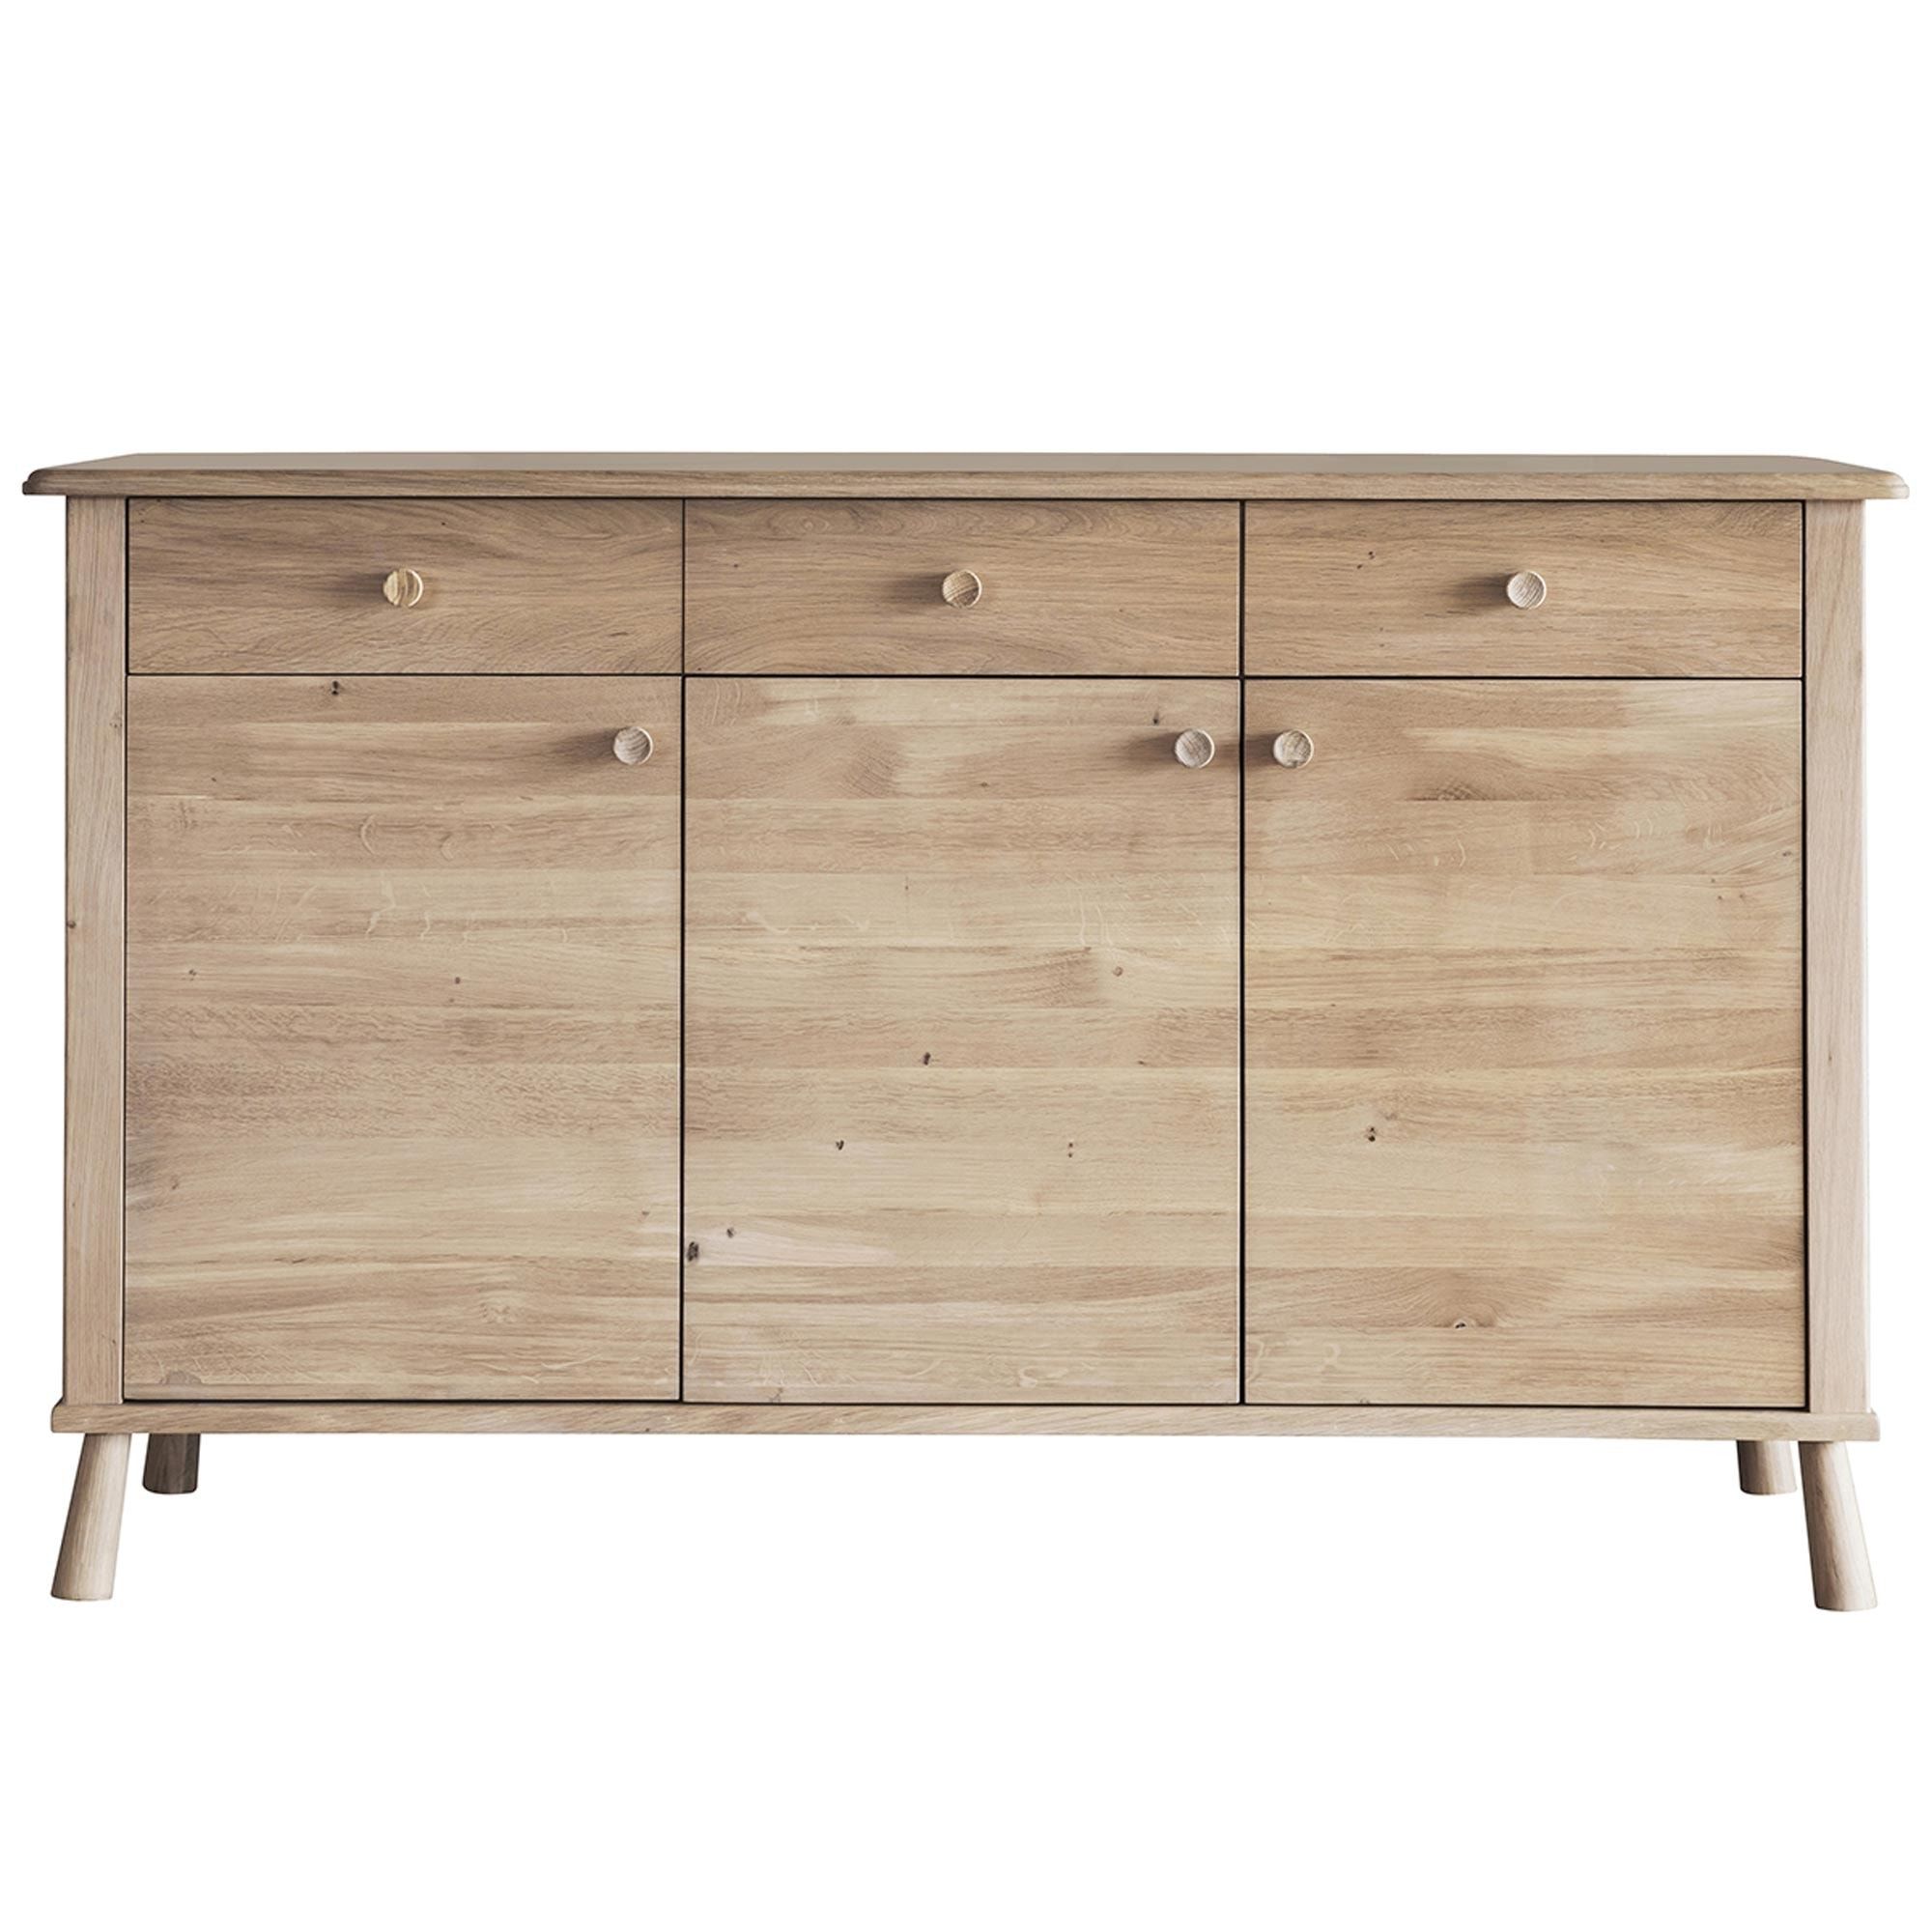 Wycombe 3 Door 3 Drawer Sideboard | Wooden Sideboards With Storage Throughout 3 Drawer Sideboards (View 18 of 20)